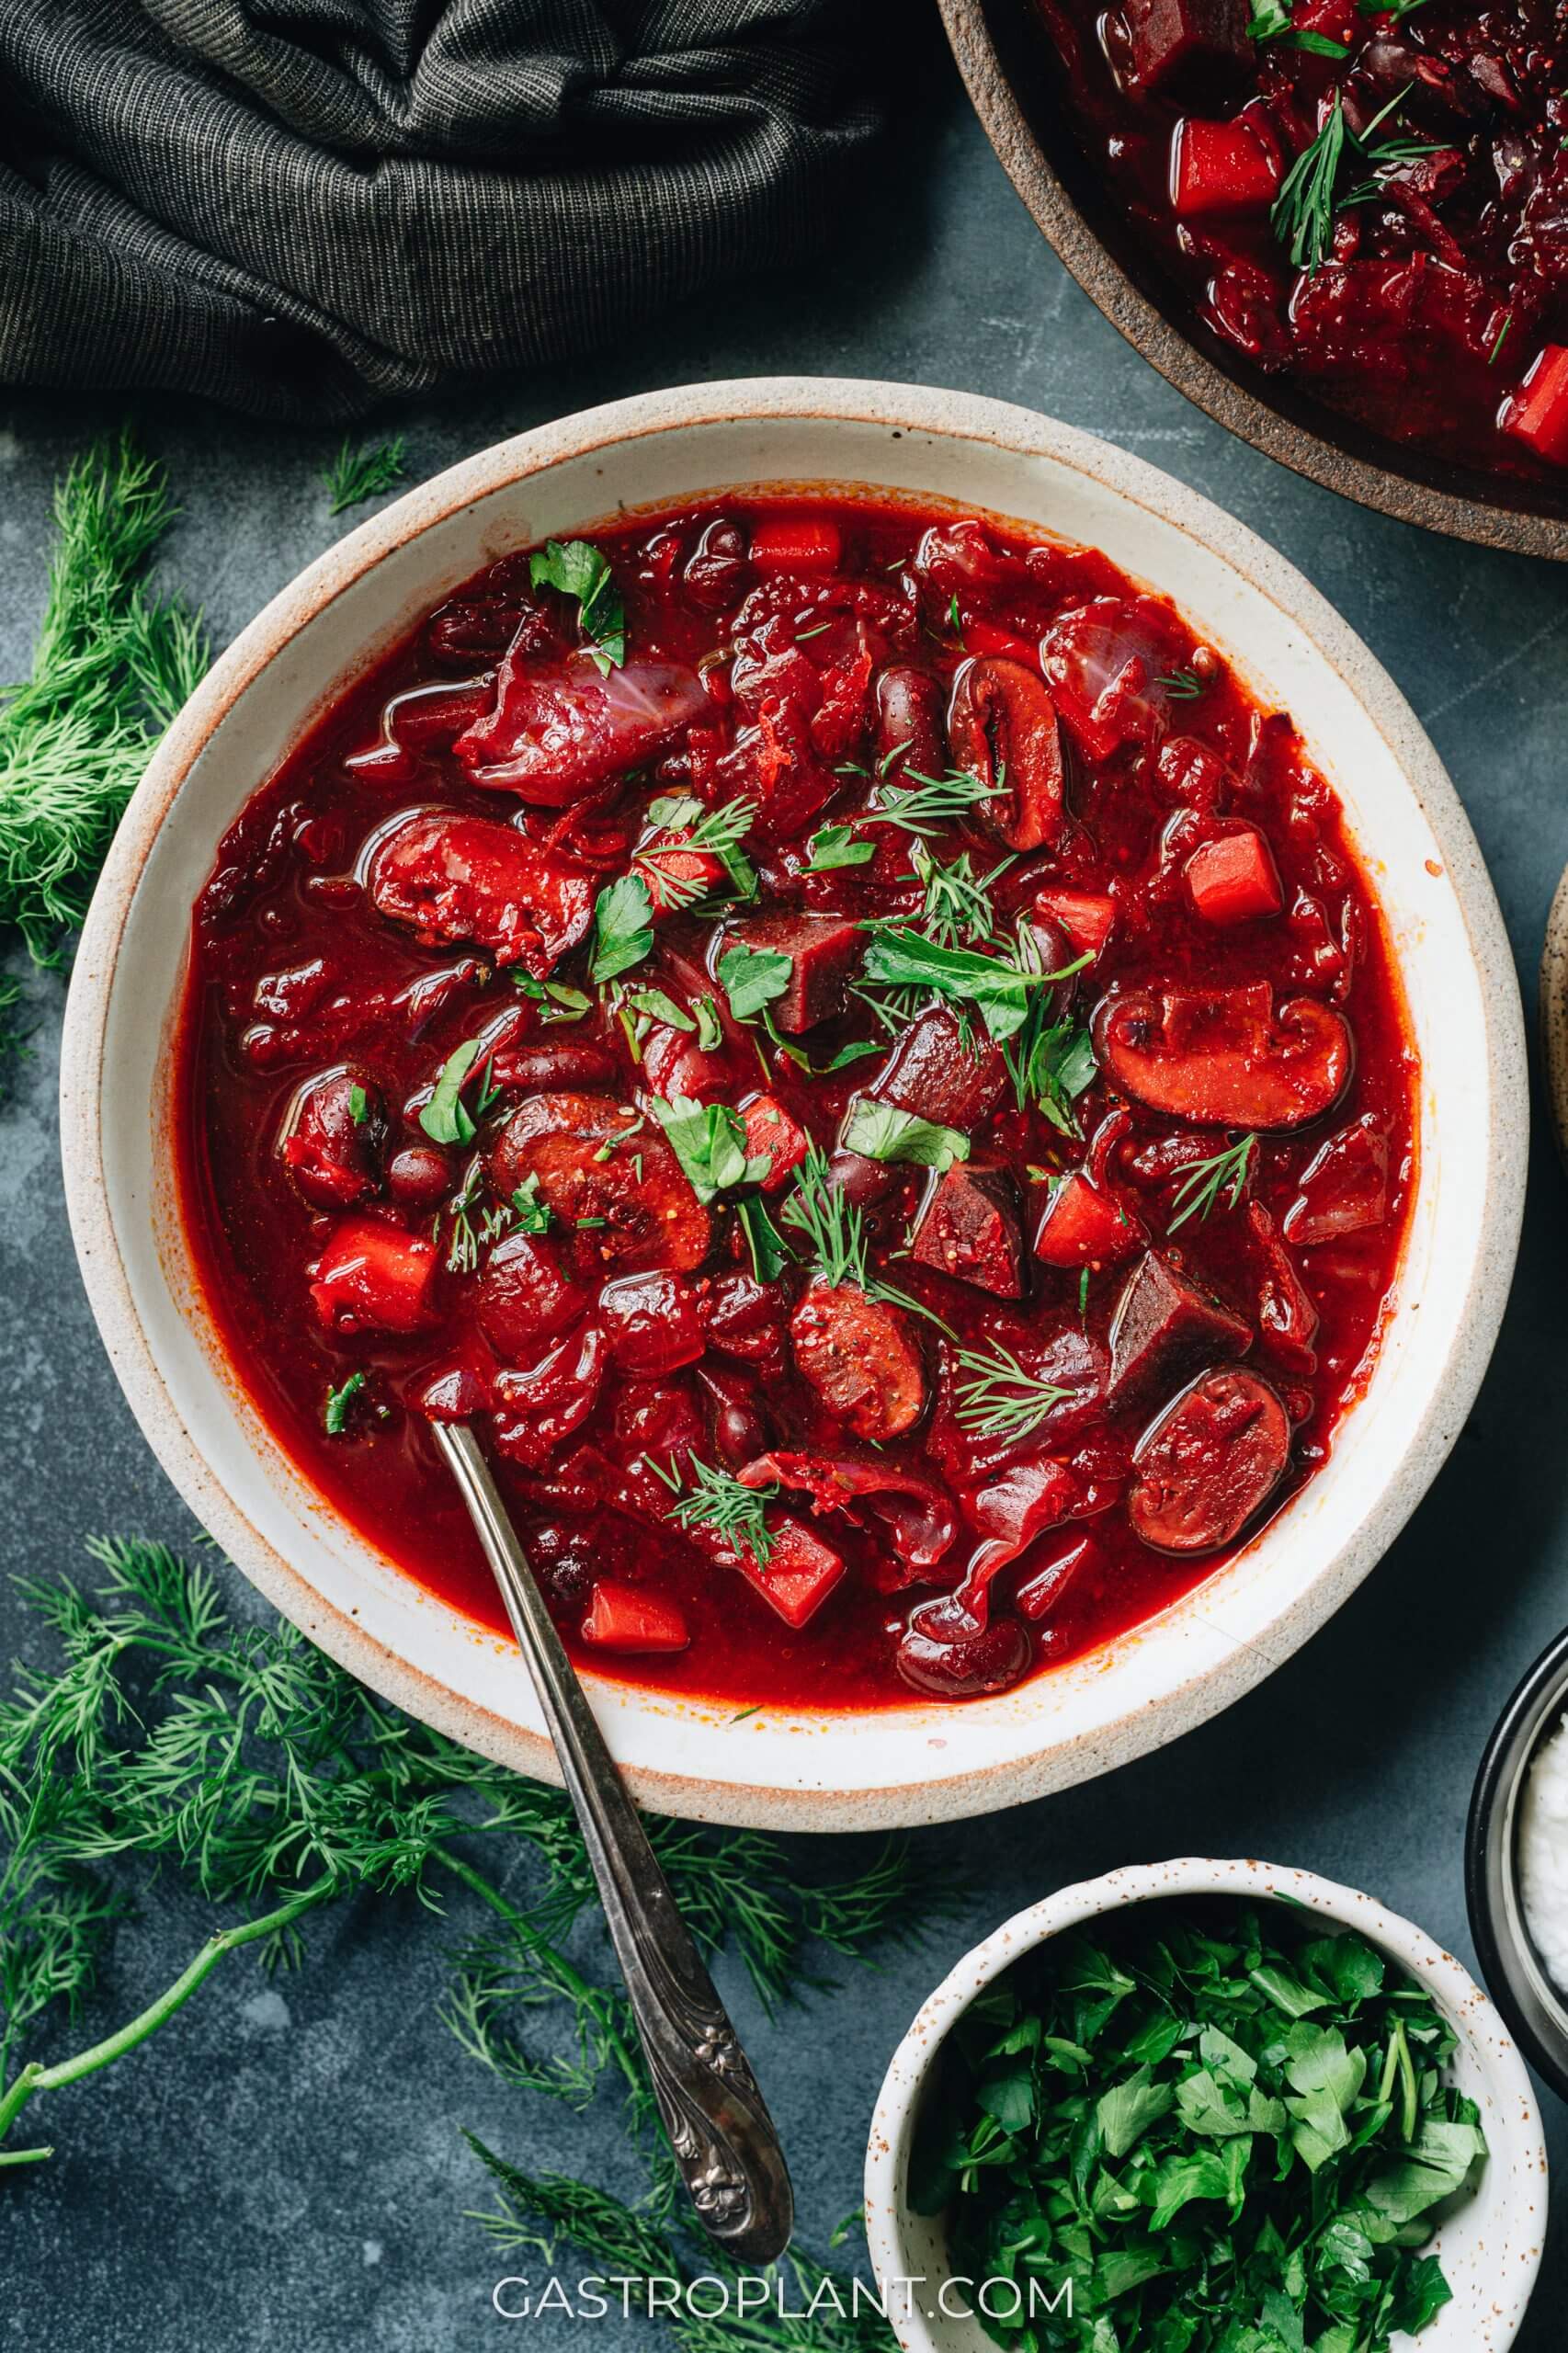 A bowl of striking scarlet borscht, made for rich flavor with vegan ingredients and garnished with dill and parsley